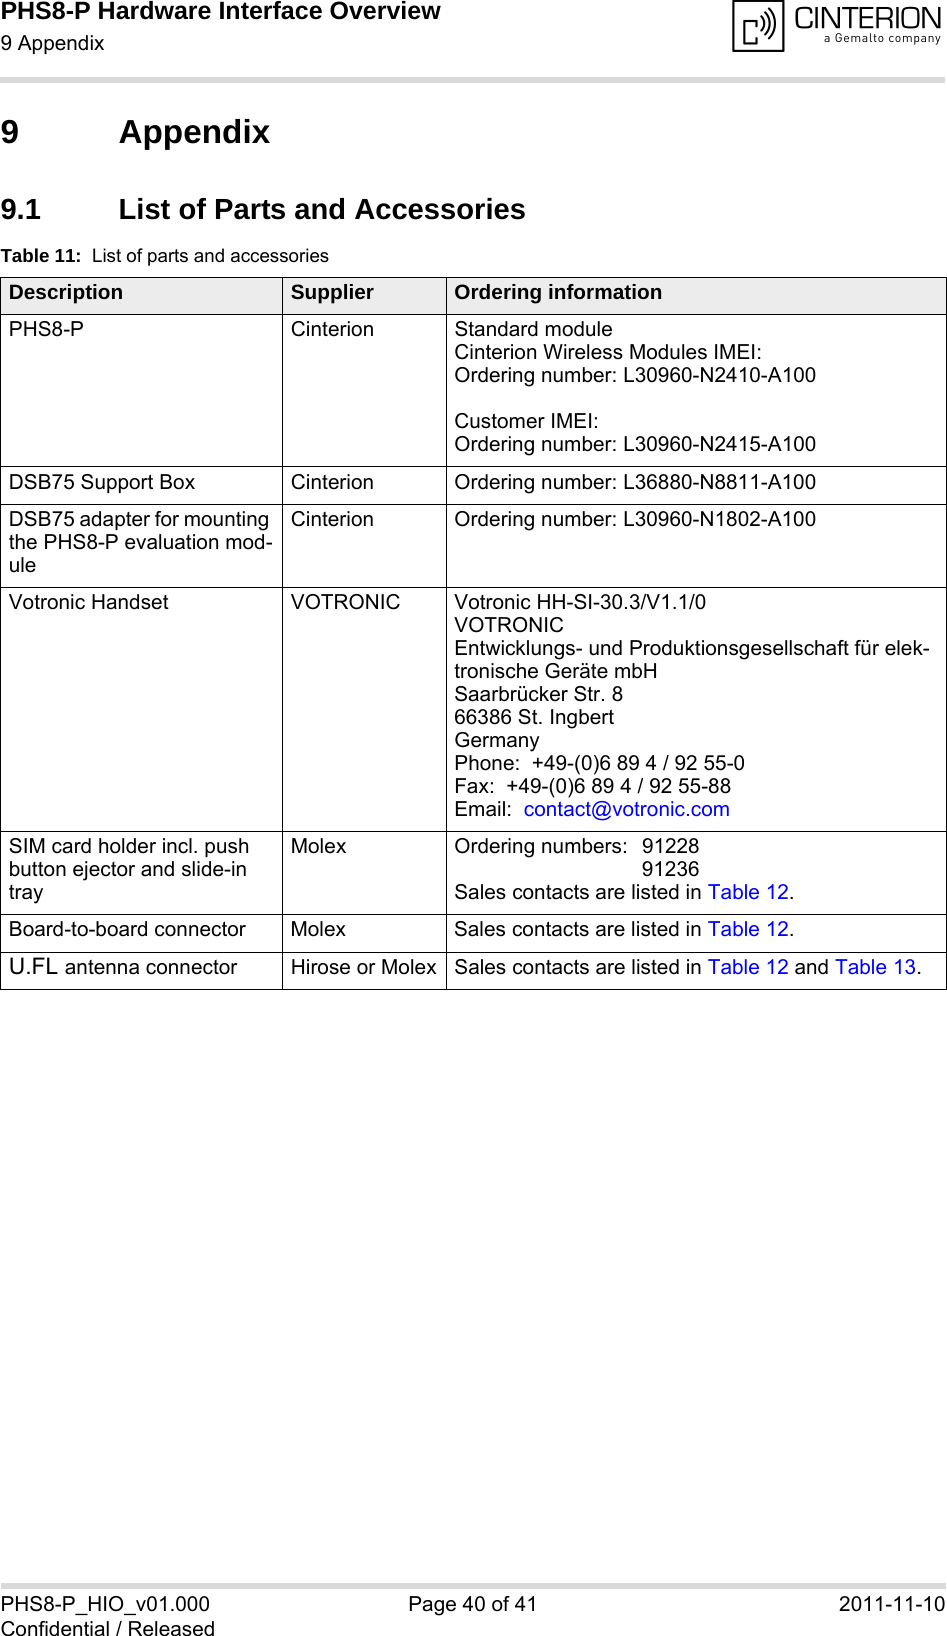 PHS8-P Hardware Interface Overview9 Appendix41PHS8-P_HIO_v01.000 Page 40 of 41 2011-11-10Confidential / Released9 Appendix9.1 List of Parts and AccessoriesTable 11:  List of parts and accessoriesDescription Supplier Ordering informationPHS8-P Cinterion Standard module Cinterion Wireless Modules IMEI:Ordering number: L30960-N2410-A100Customer IMEI:Ordering number: L30960-N2415-A100DSB75 Support Box Cinterion Ordering number: L36880-N8811-A100DSB75 adapter for mounting the PHS8-P evaluation mod-uleCinterion Ordering number: L30960-N1802-A100Votronic Handset VOTRONIC Votronic HH-SI-30.3/V1.1/0VOTRONIC Entwicklungs- und Produktionsgesellschaft für elek-tronische Geräte mbHSaarbrücker Str. 866386 St. IngbertGermanyPhone:  +49-(0)6 89 4 / 92 55-0Fax:  +49-(0)6 89 4 / 92 55-88Email:  contact@votronic.comSIM card holder incl. push button ejector and slide-in trayMolex Ordering numbers:  91228 91236Sales contacts are listed in Table 12.Board-to-board connector Molex Sales contacts are listed in Table 12.U.FL antenna connector Hirose or Molex Sales contacts are listed in Table 12 and Table 13.